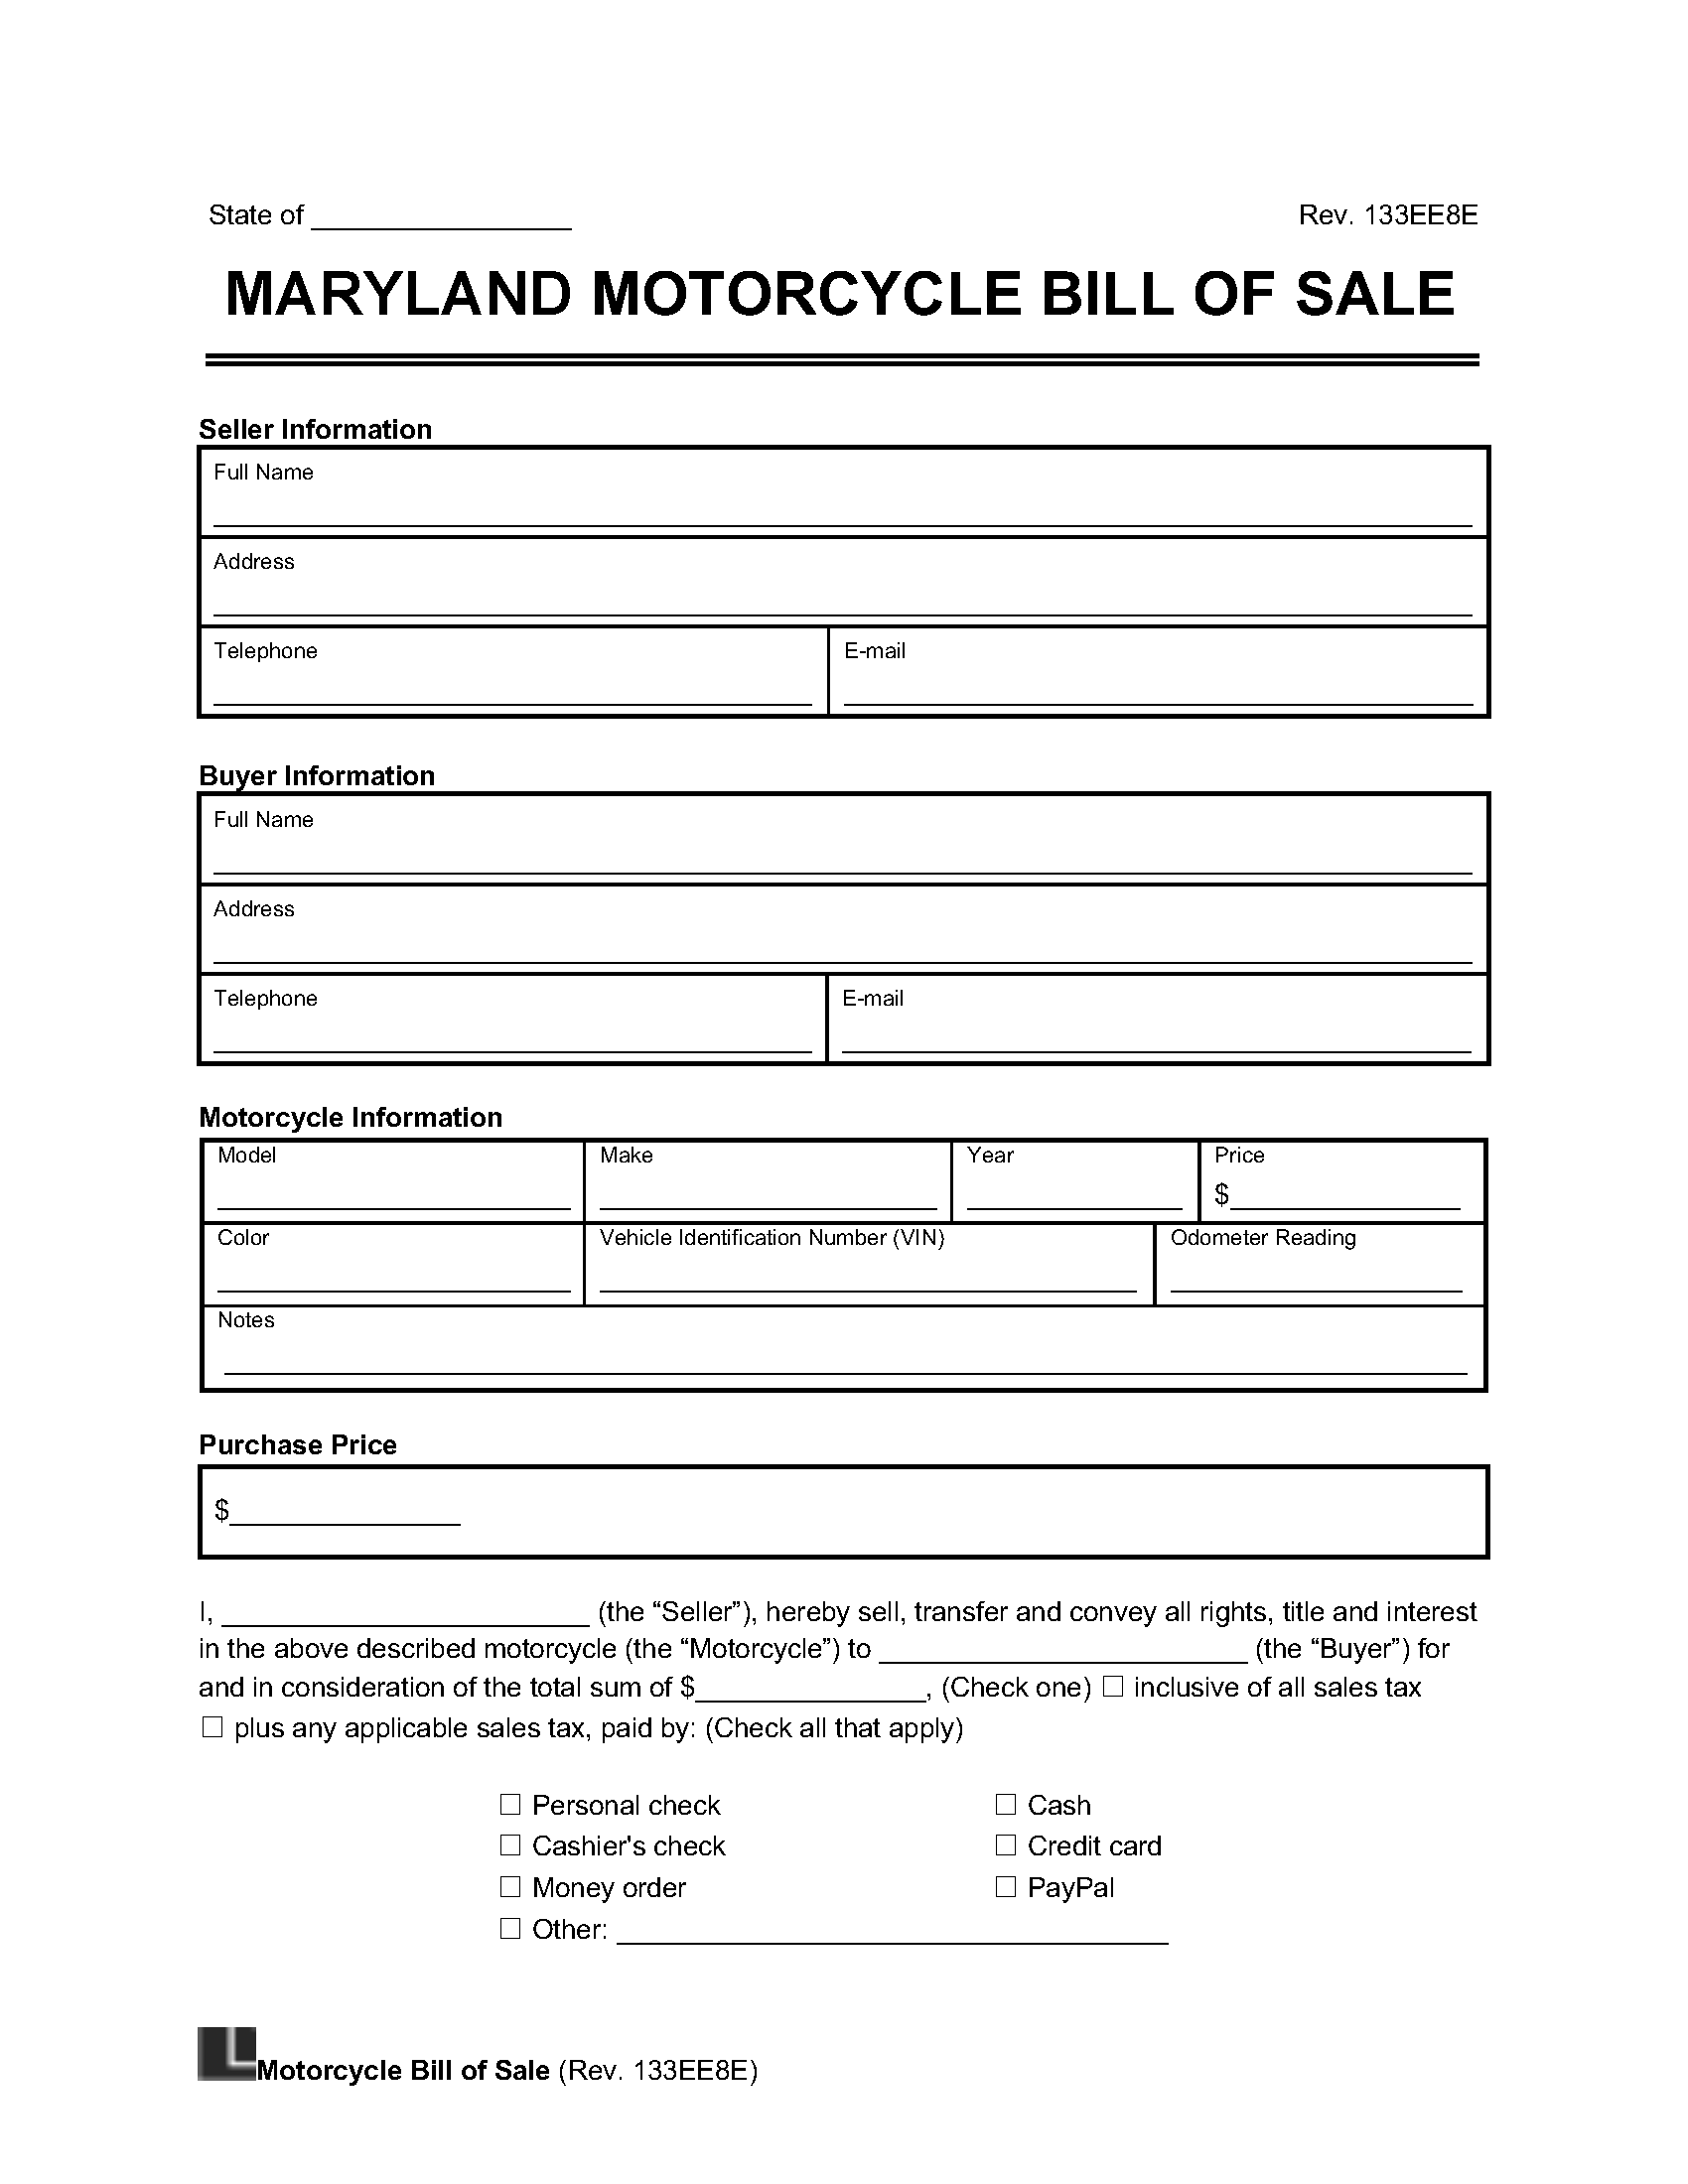 maryland motorcycle bill of sale sample